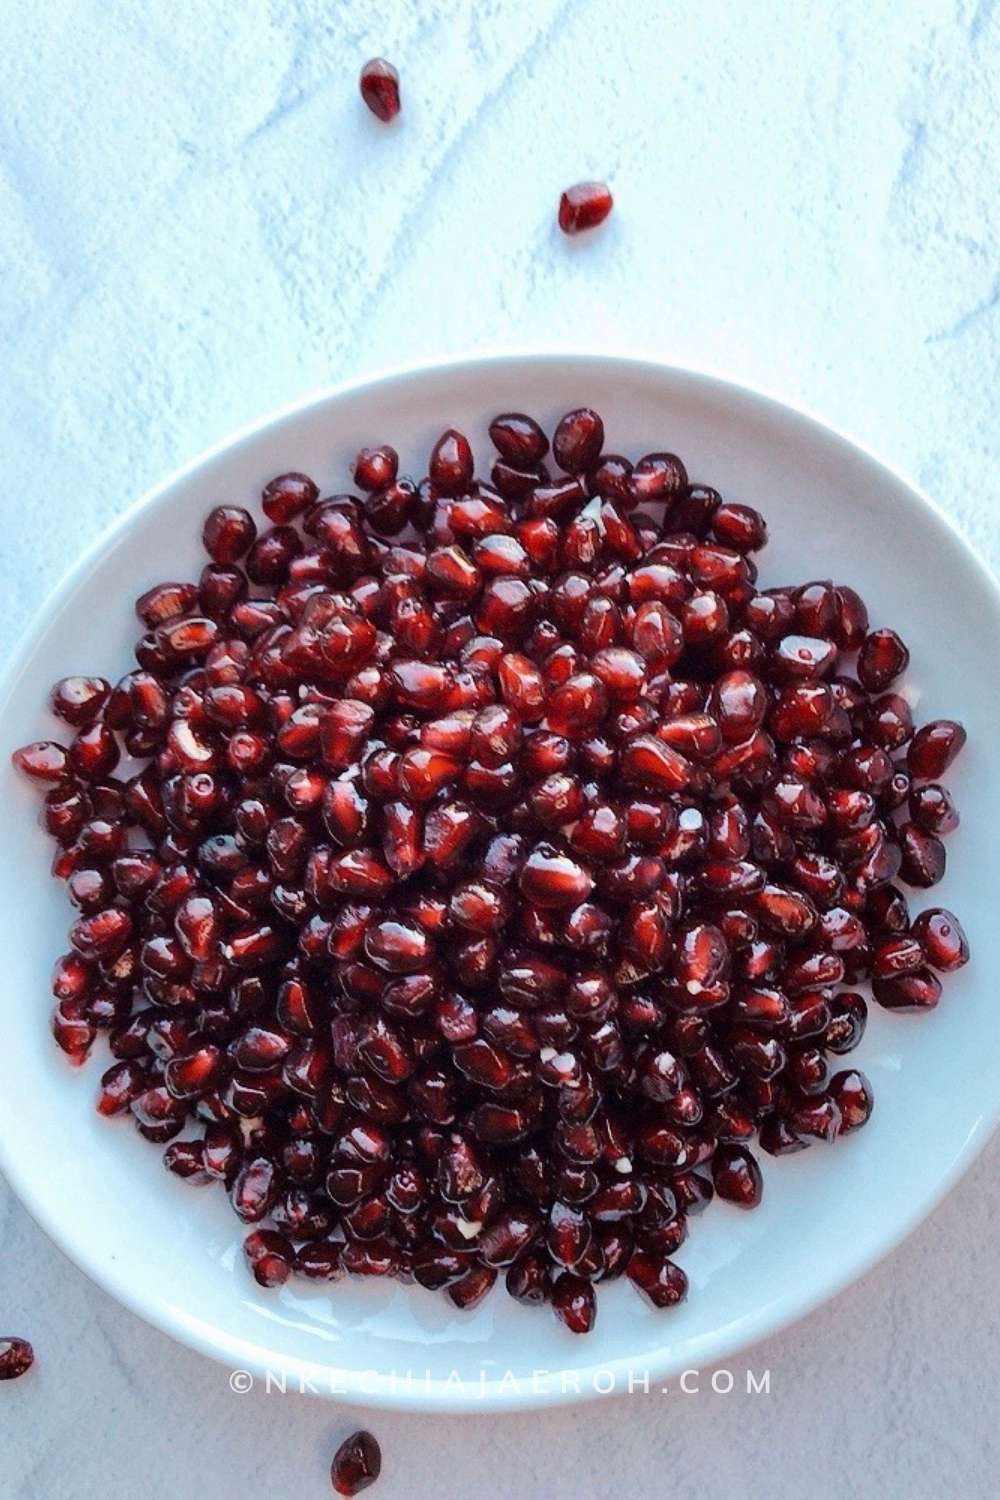 Learn how to cut and seed a pomegranate without water - this easy to follow steps will get you eating pomegranates!